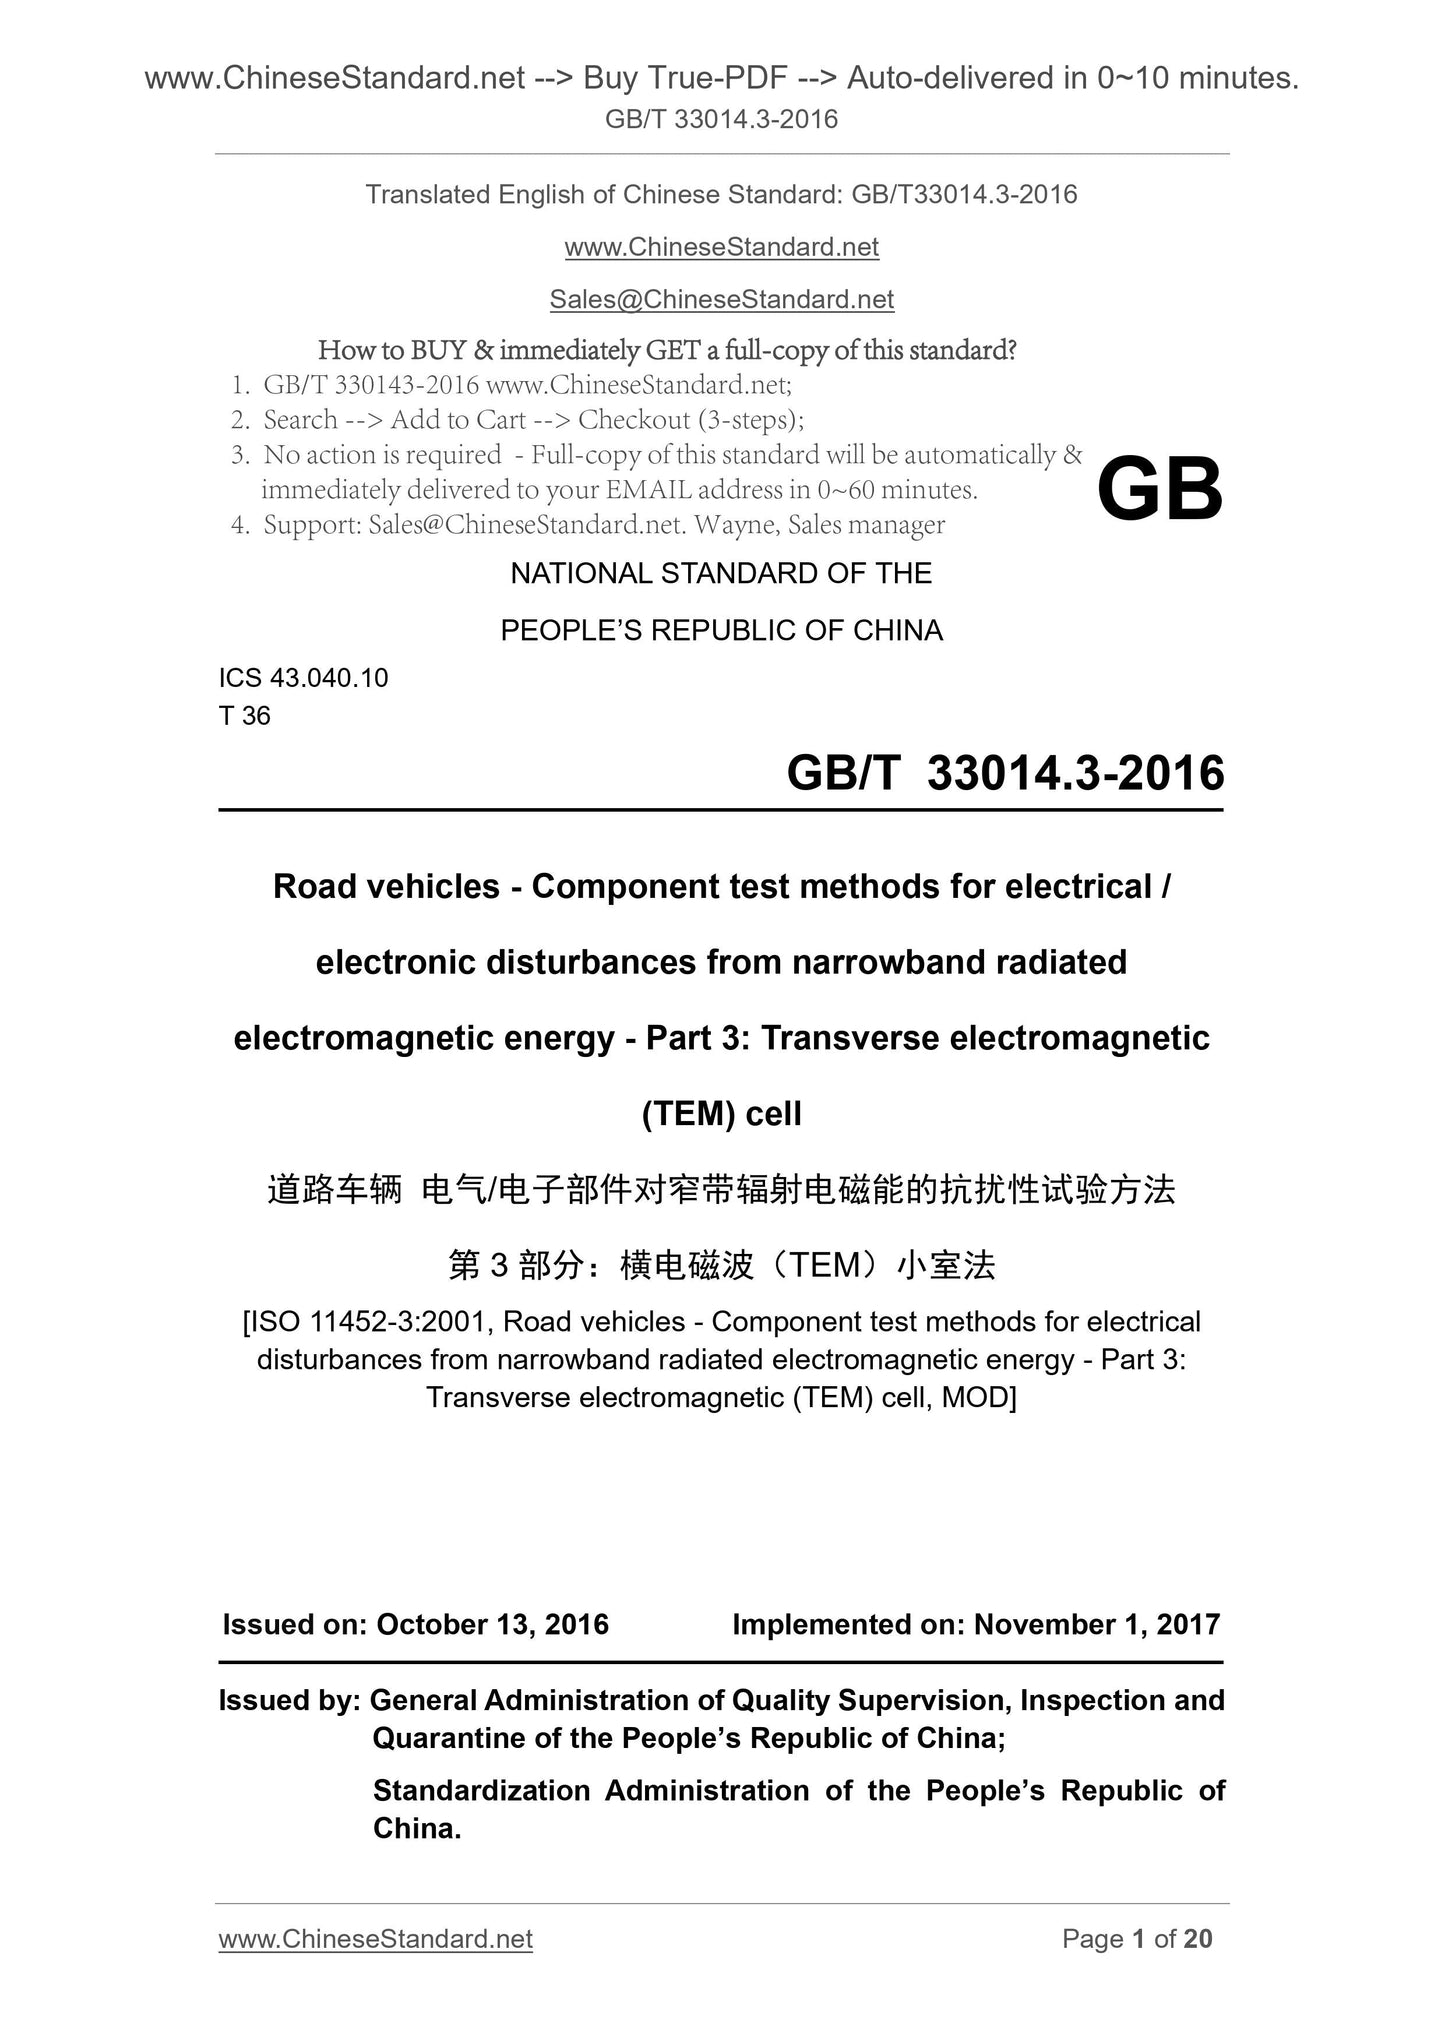 GB/T 33014.3-2016 Page 1